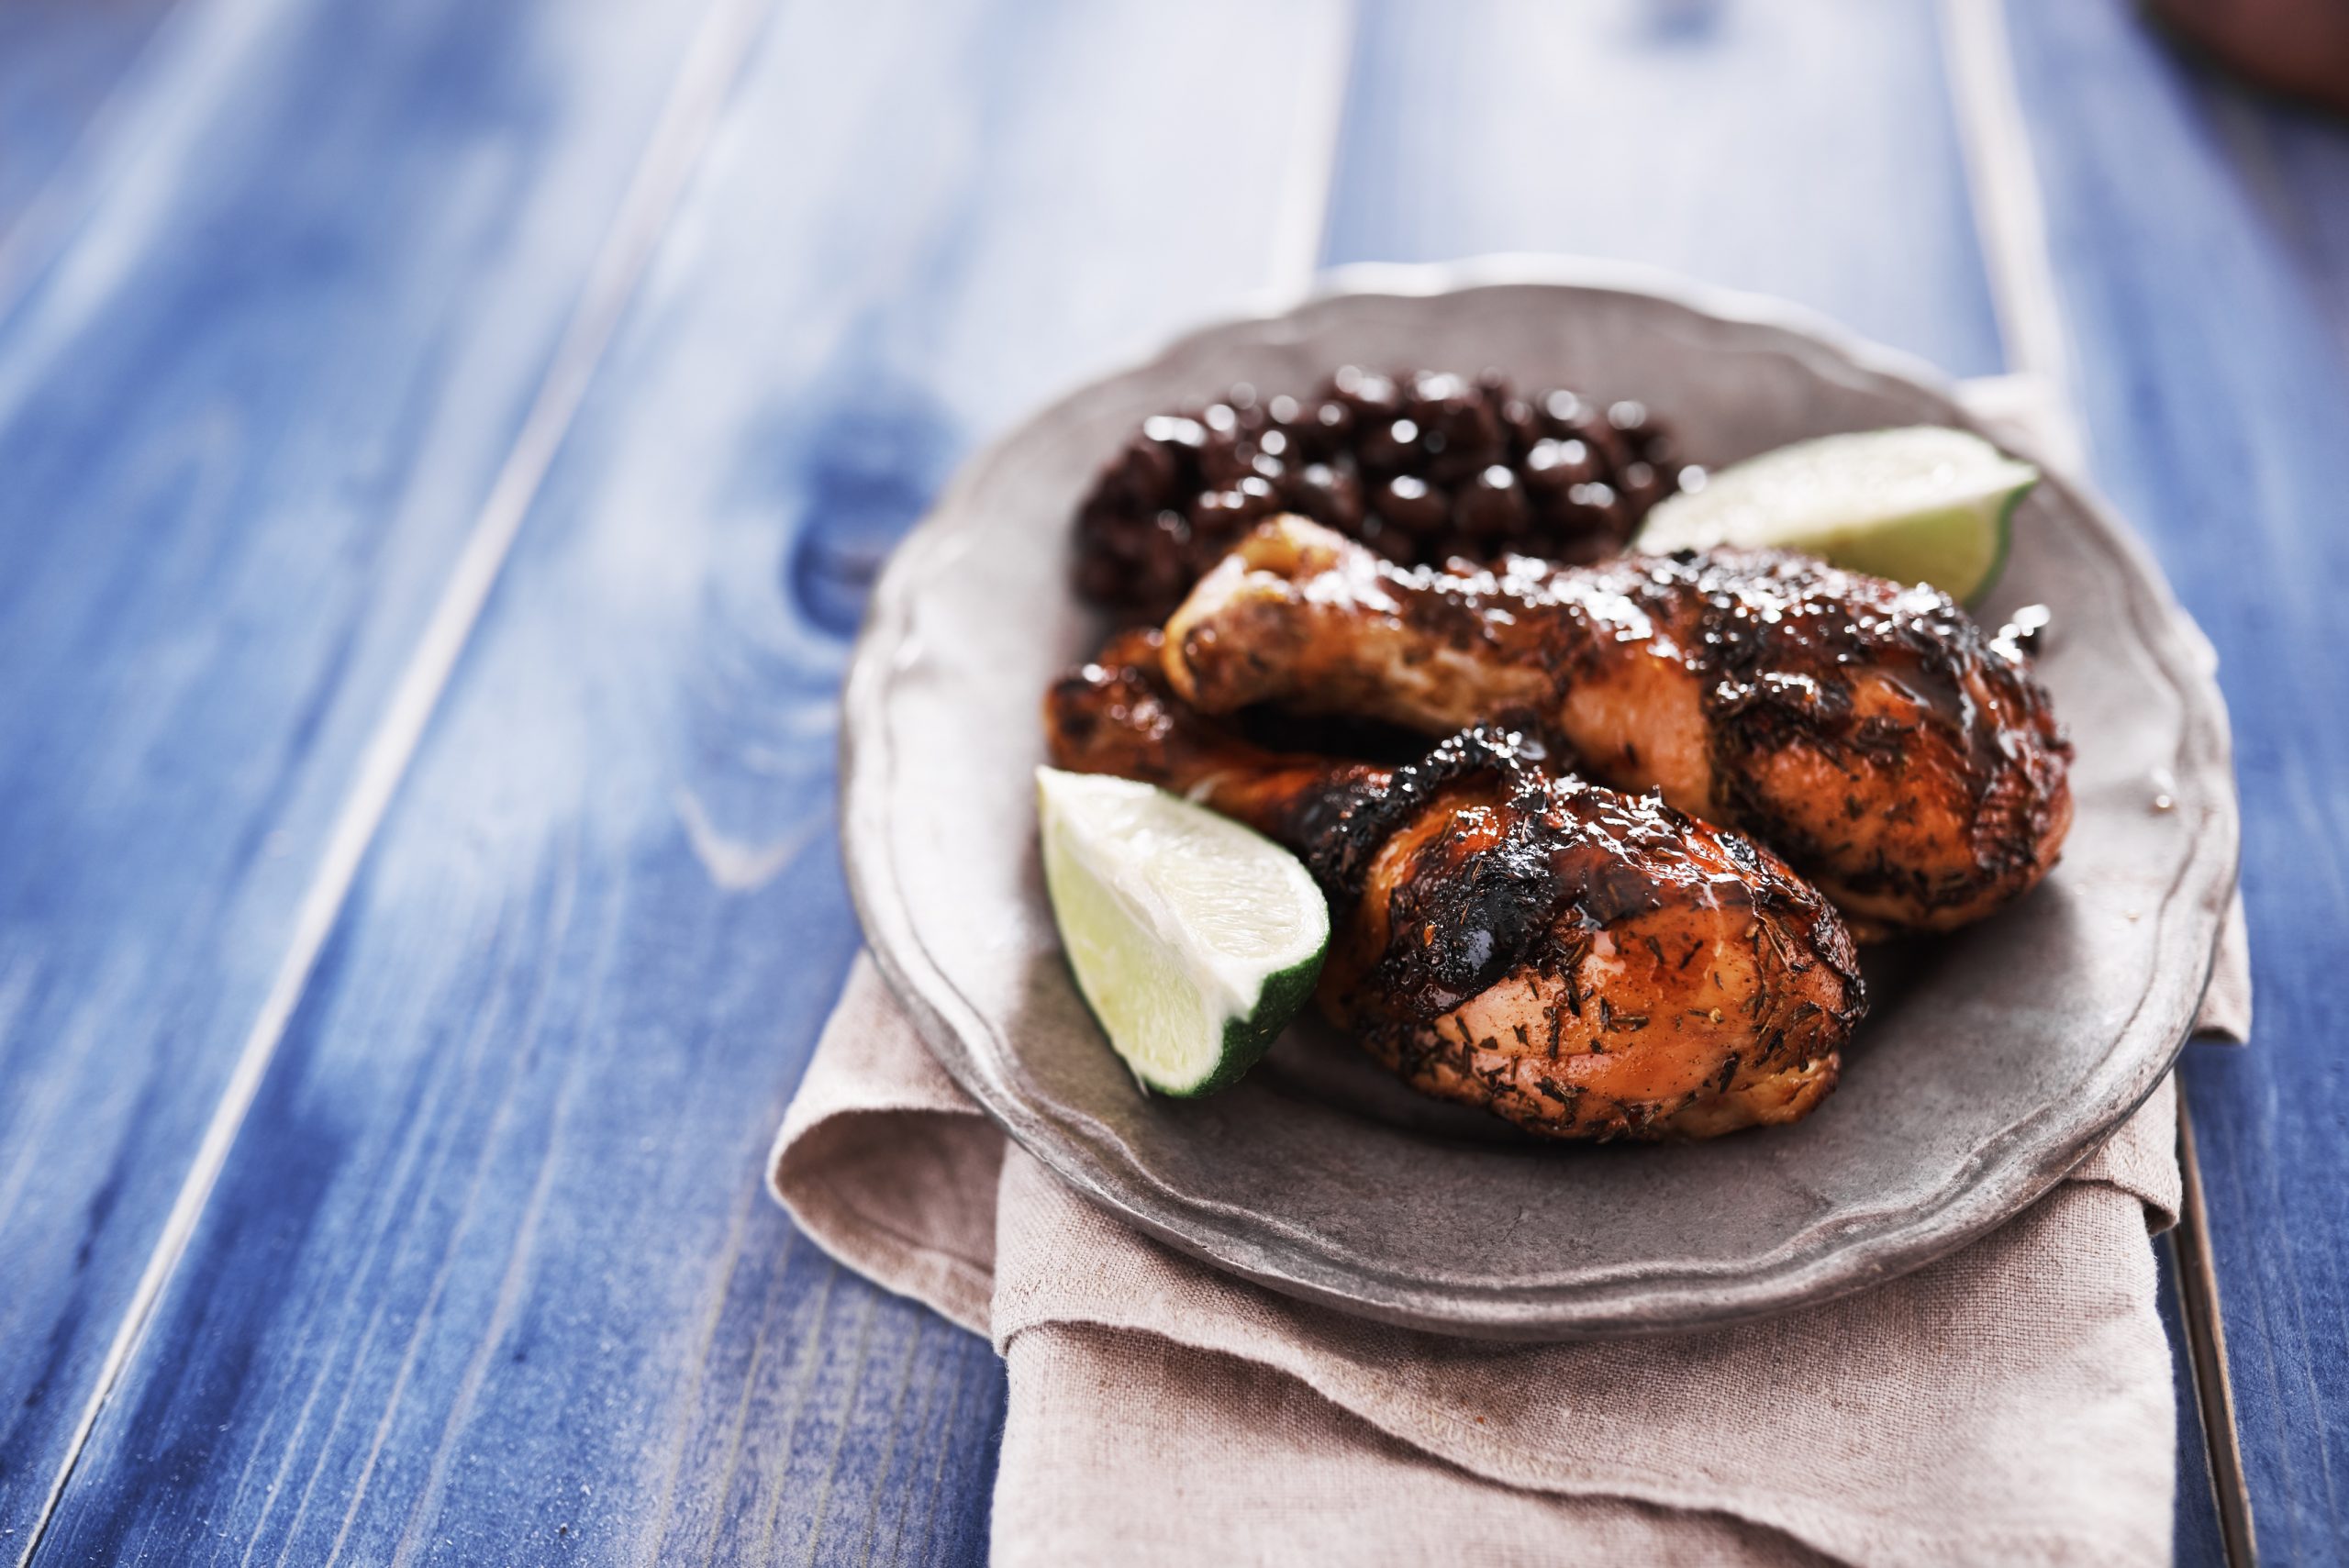 **Deliciously Spiced-Up Mexican Chicken Recipes to Tantalize Your Taste Buds**